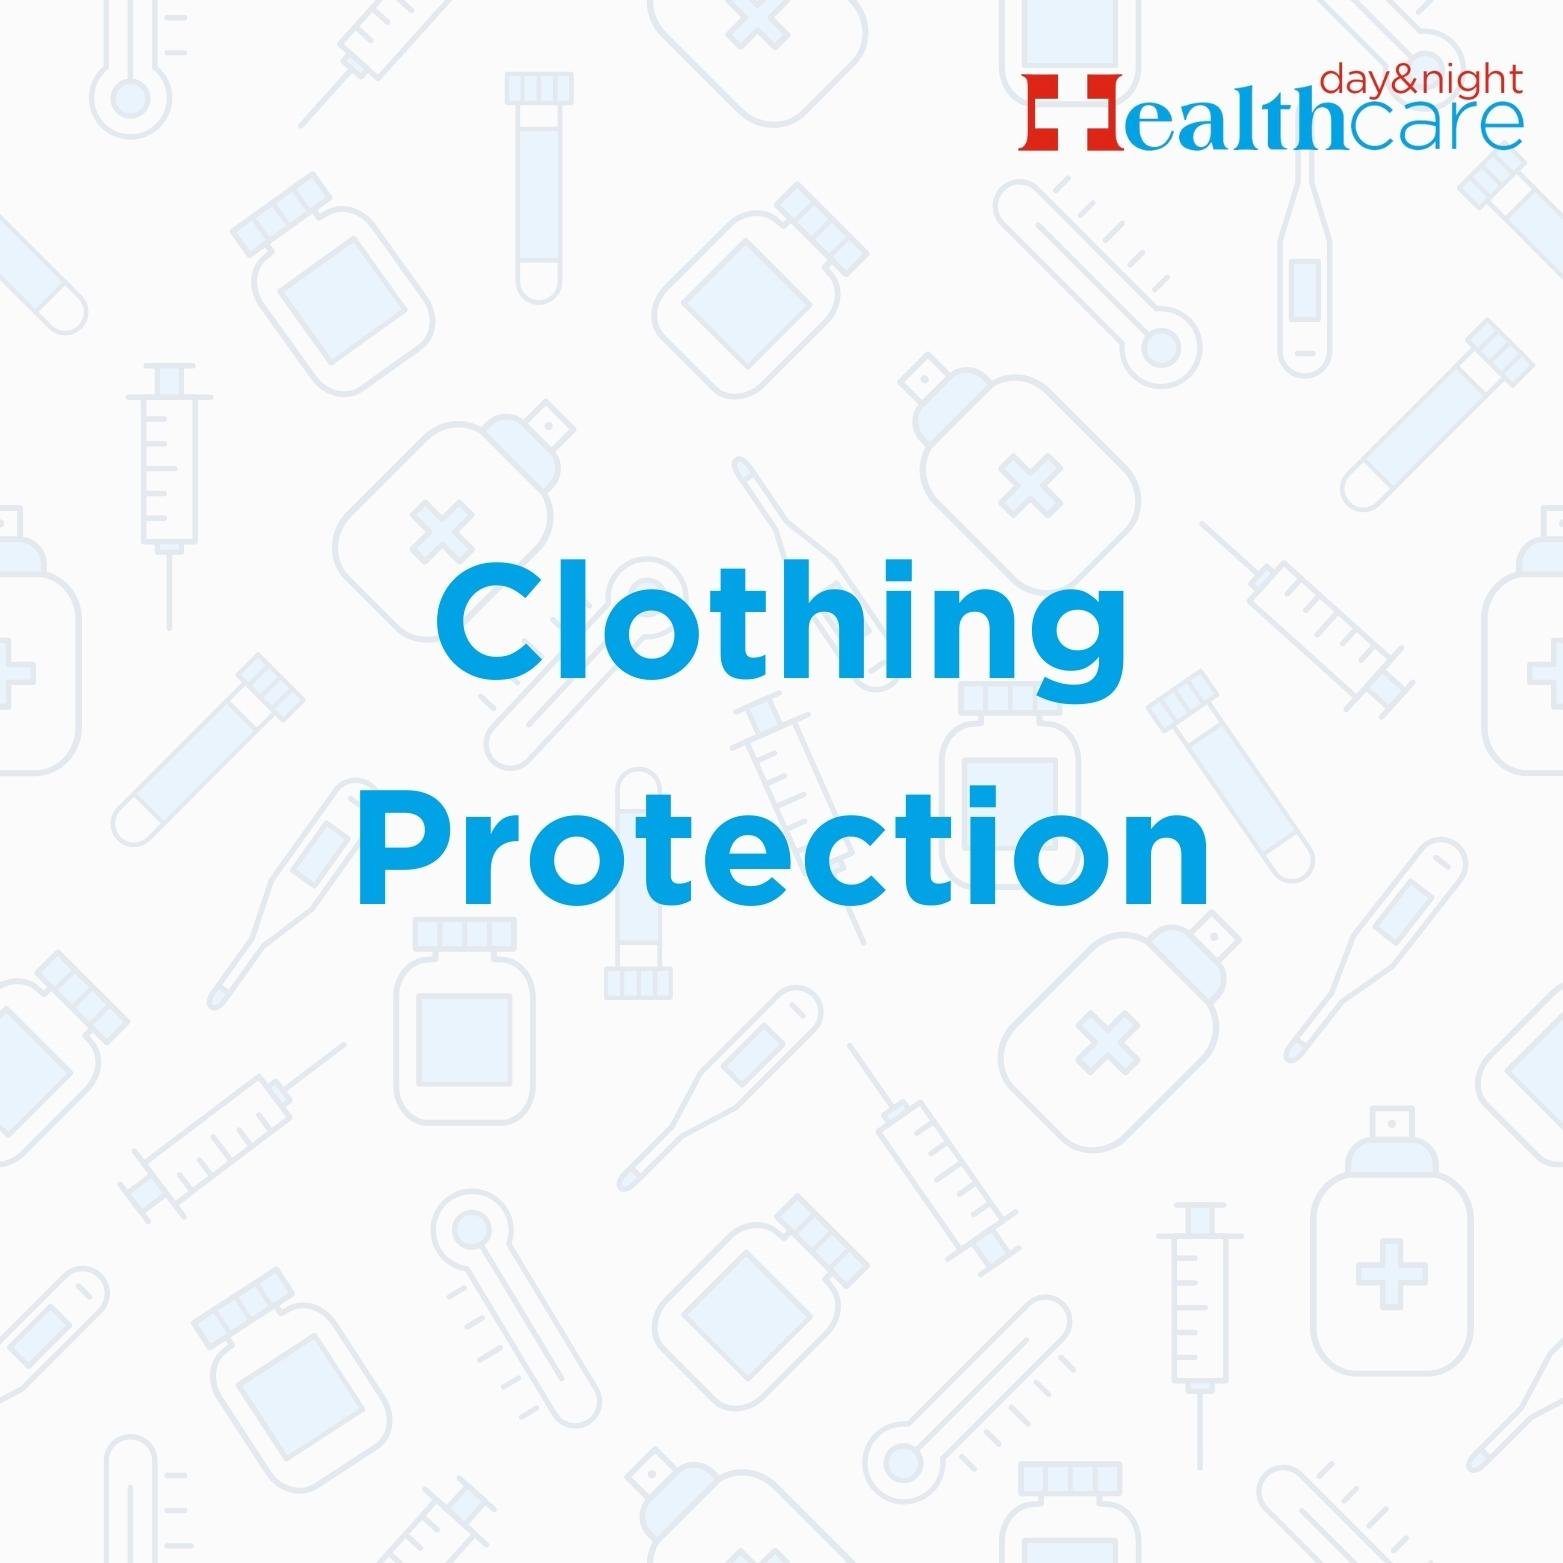 Clothing Protection